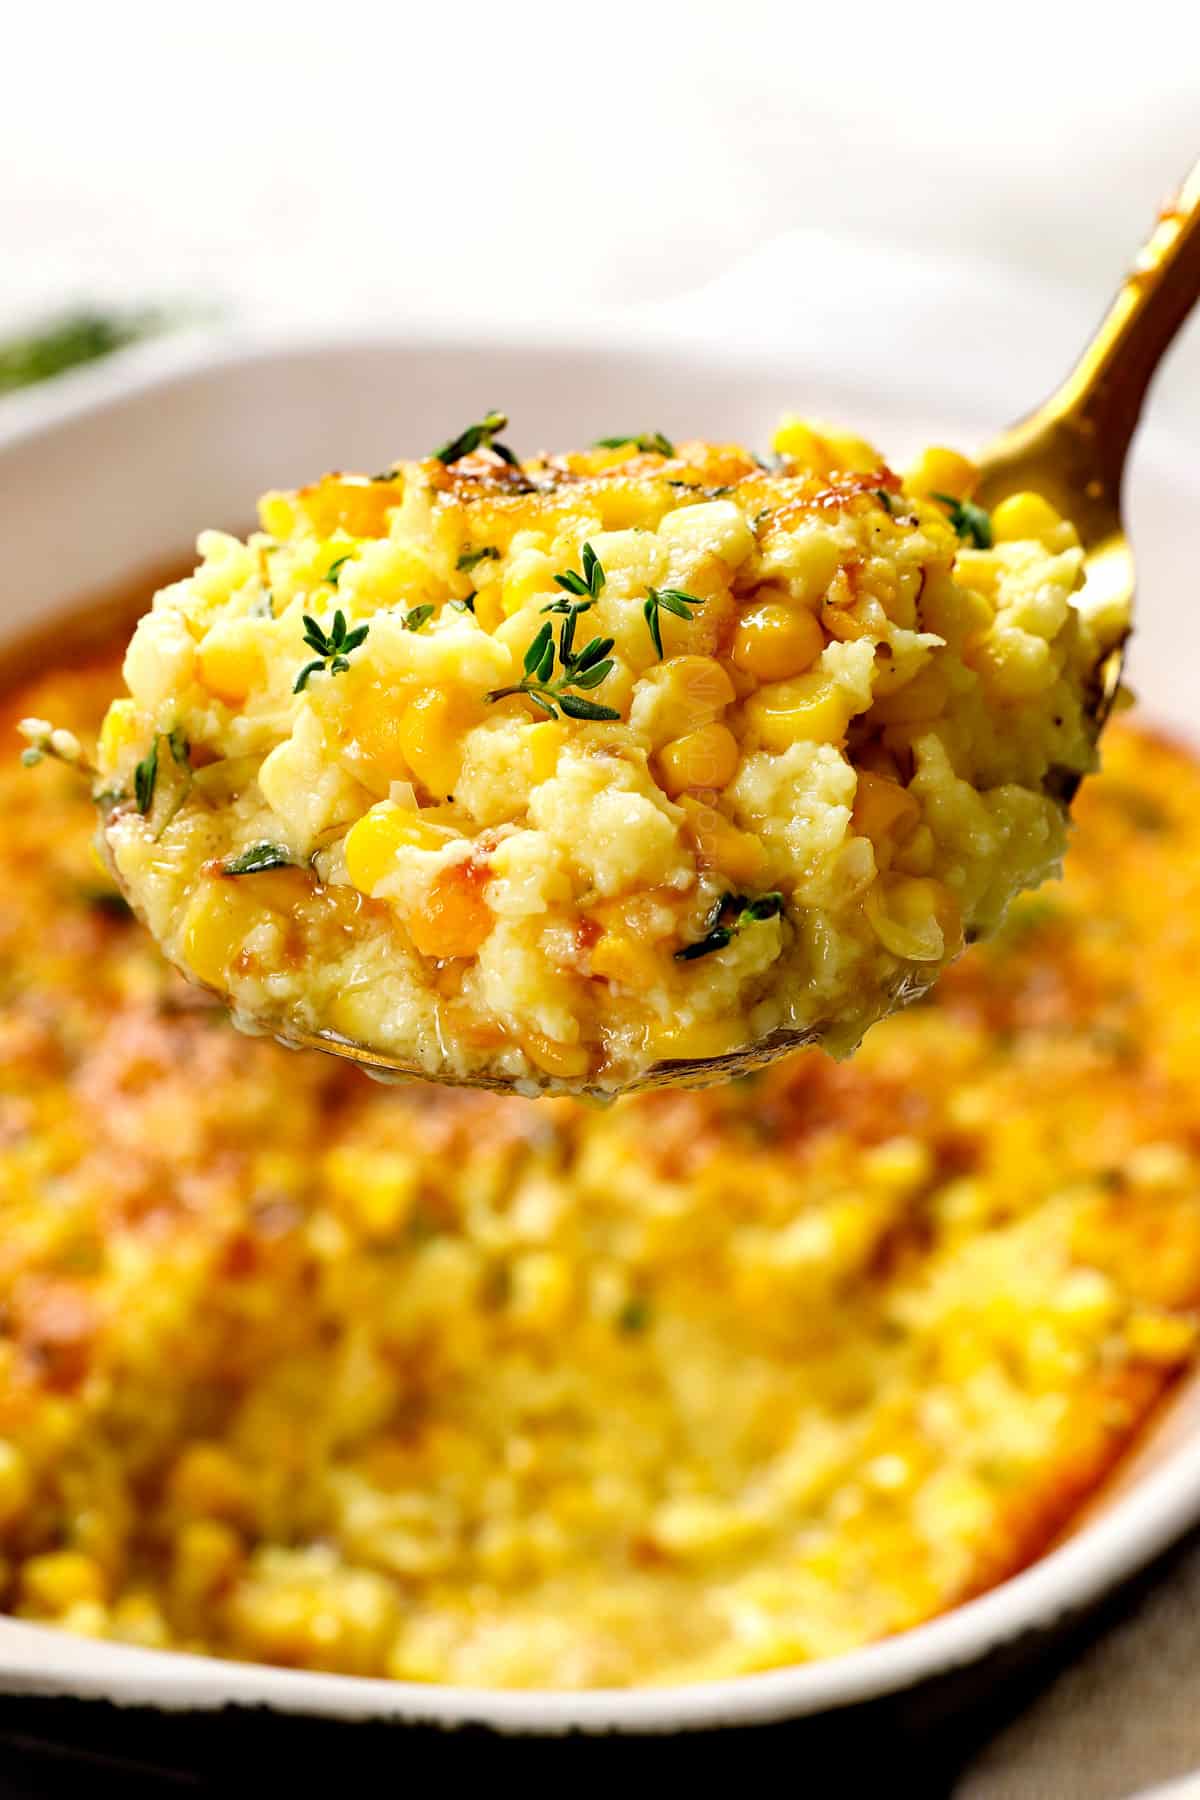 up close of a serving scoop of corn pudding showing how creamy it is